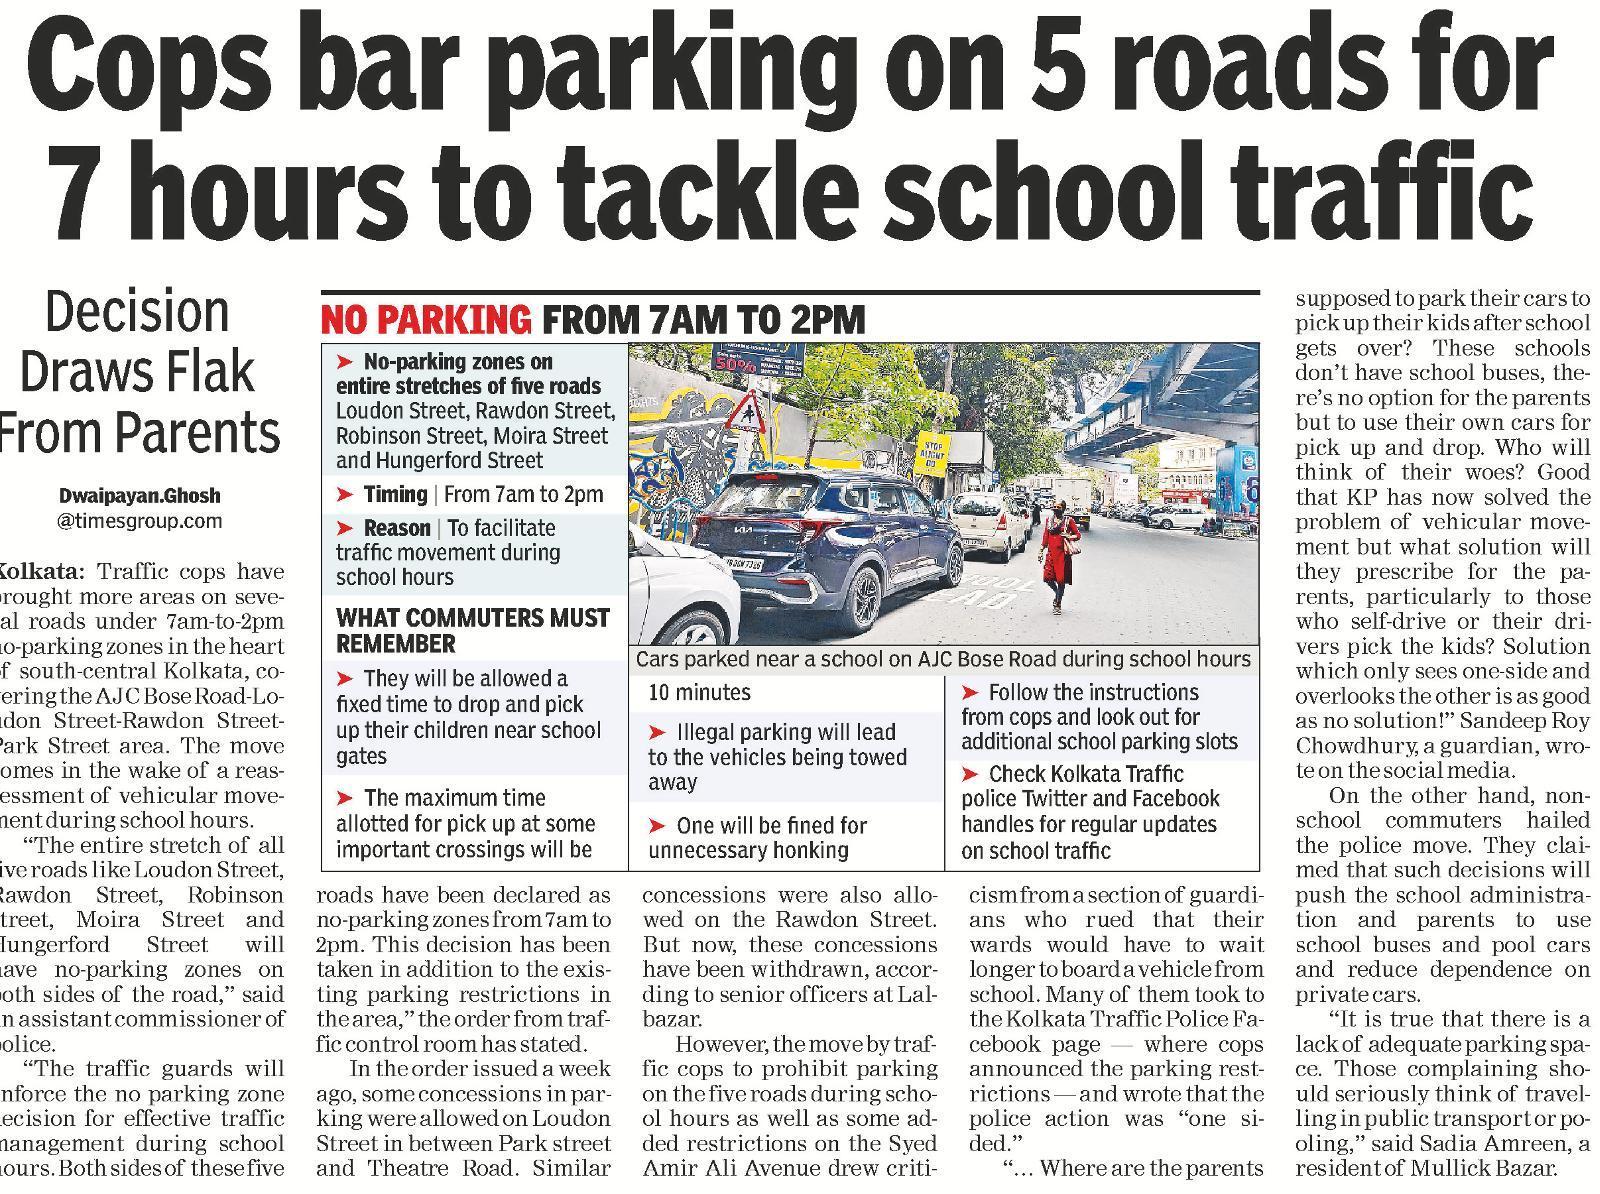 Day 1: Parking ban on 5 city roads eases traffic during school hours